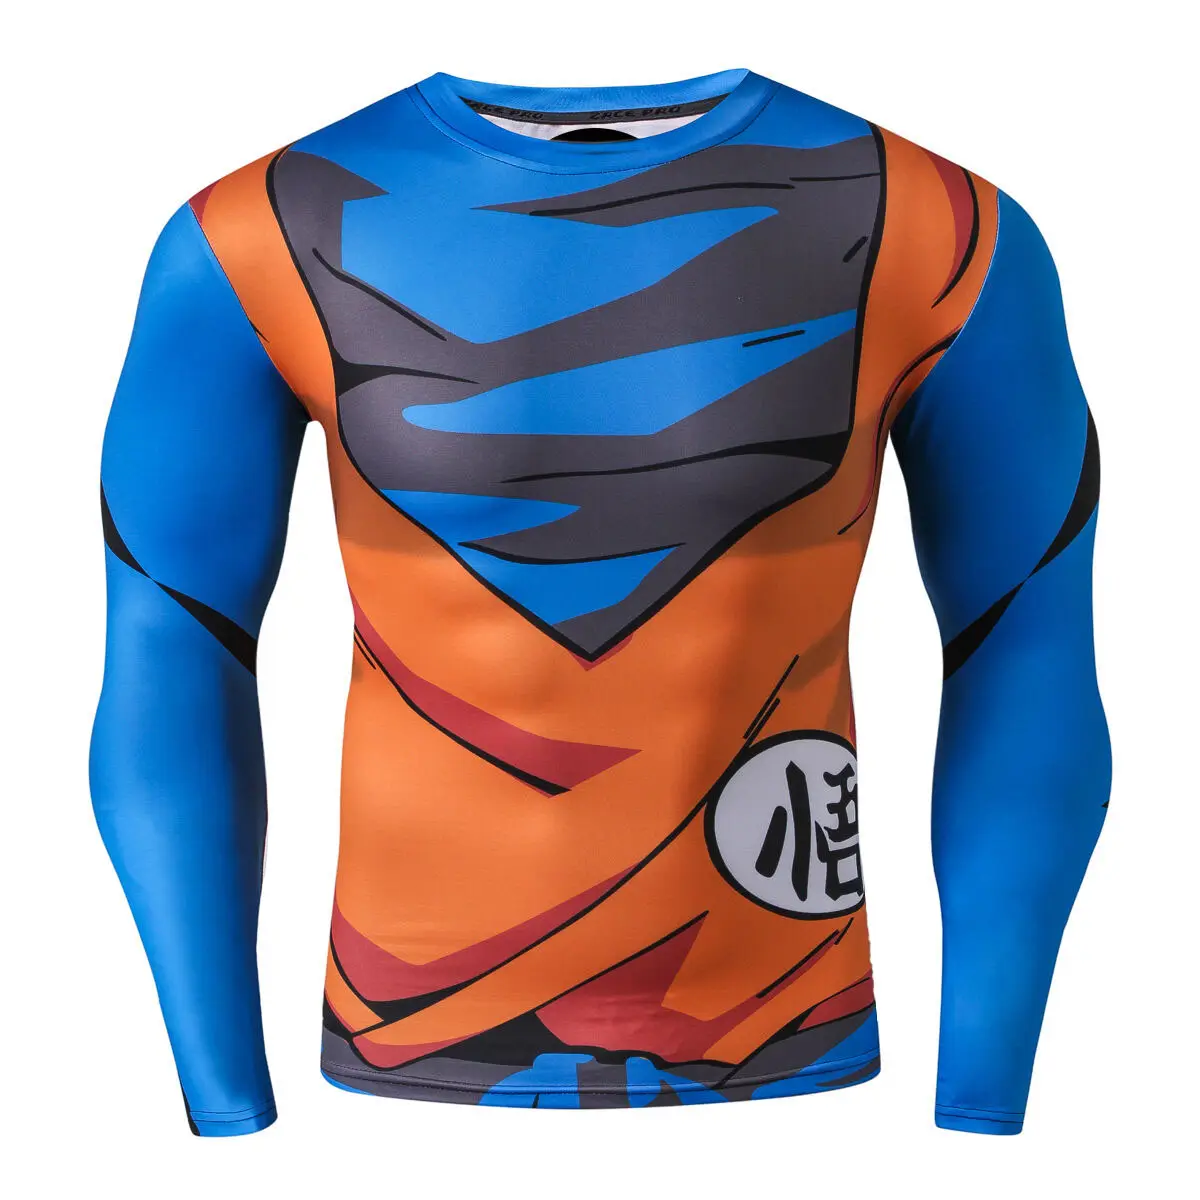 Best Selling Quick Dry Superhero Sports T-shirt Compression Gym T-shirt with 3D sublimation designs sports group rashguards